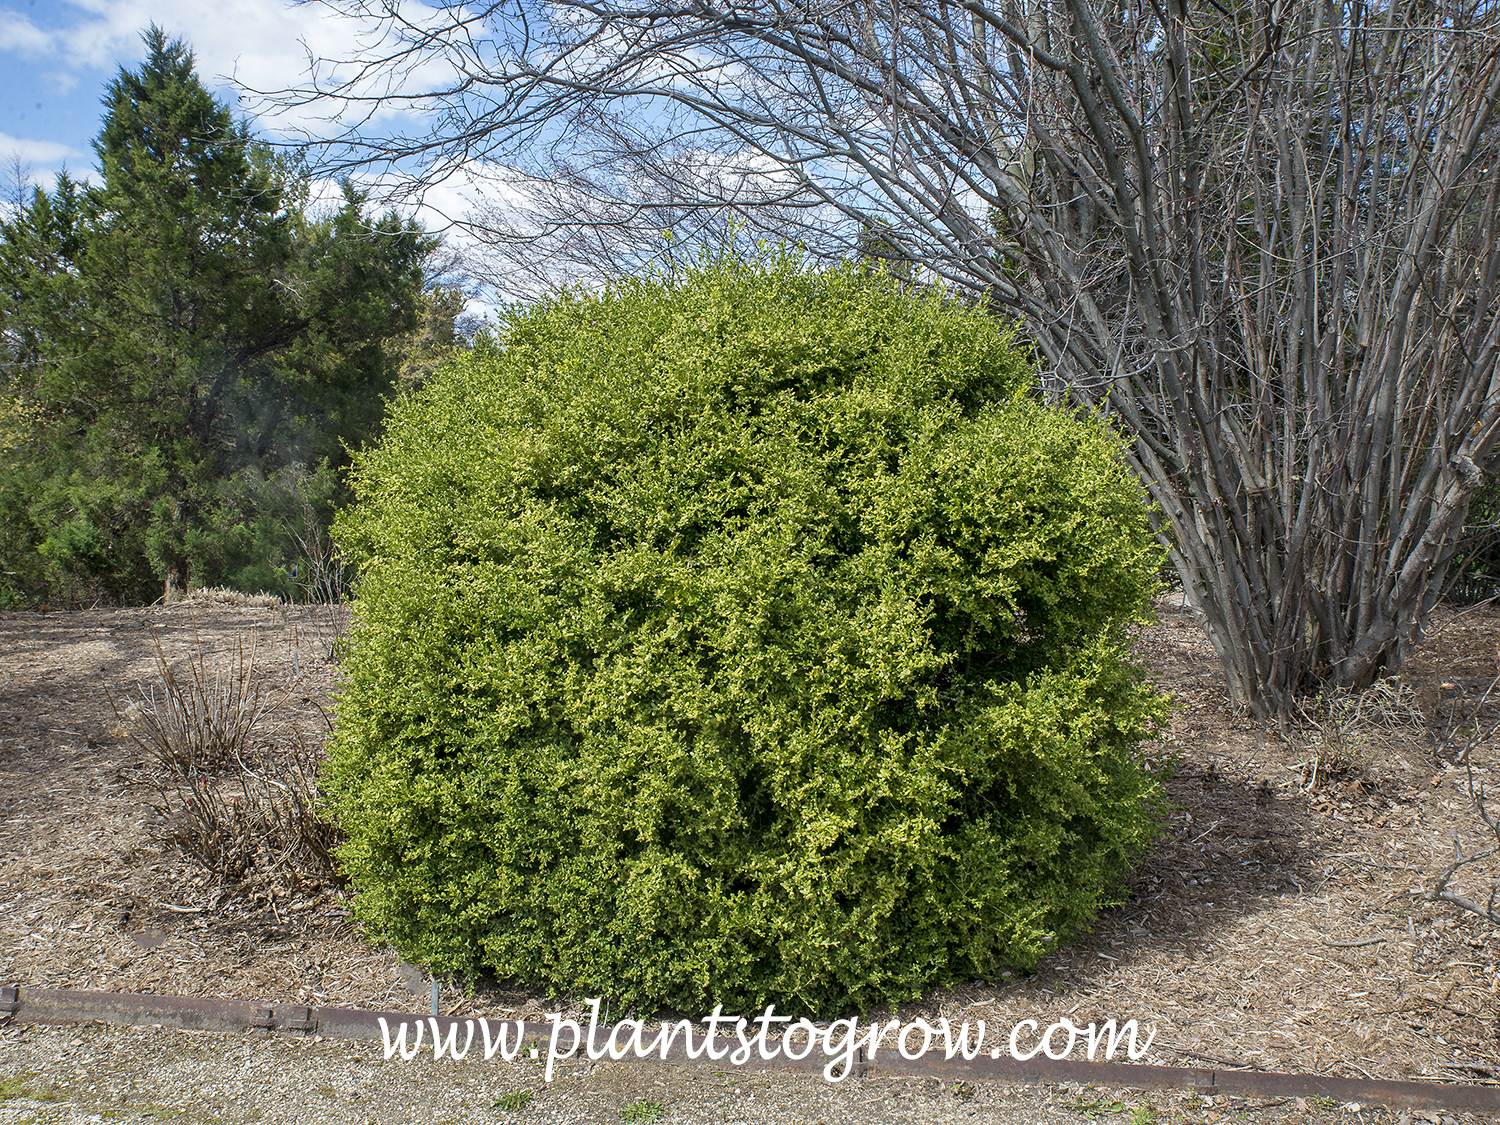 Winter Green Boxwood (Buxus sinica var. insularis)
This plant has had little shearing.  Allowed to reach this large size.  Easy to keep much smaller by pruning.